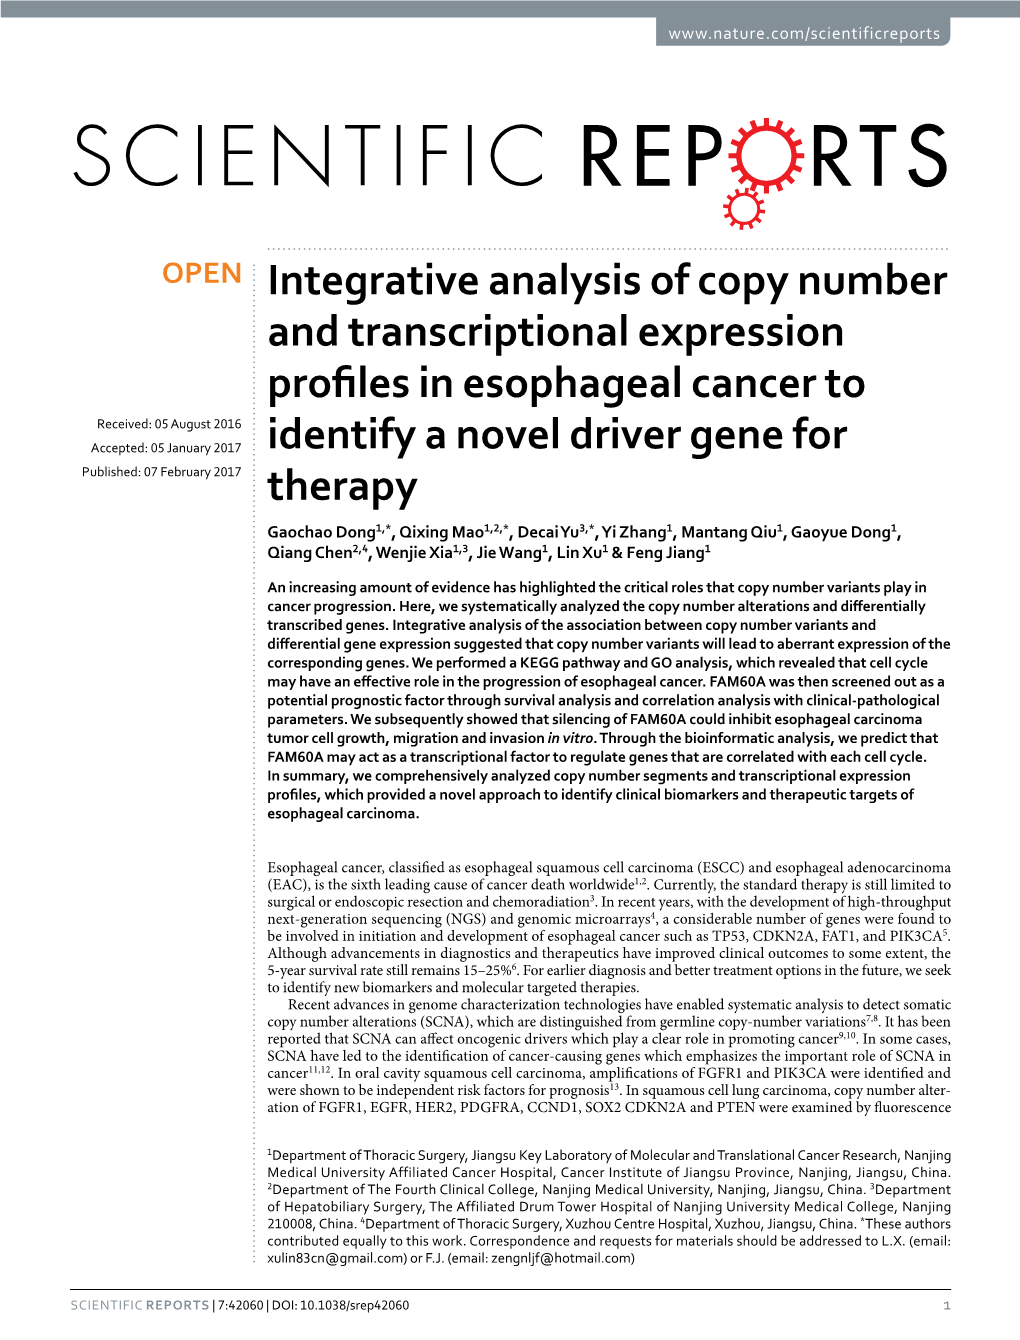 Integrative Analysis of Copy Number and Transcriptional Expression